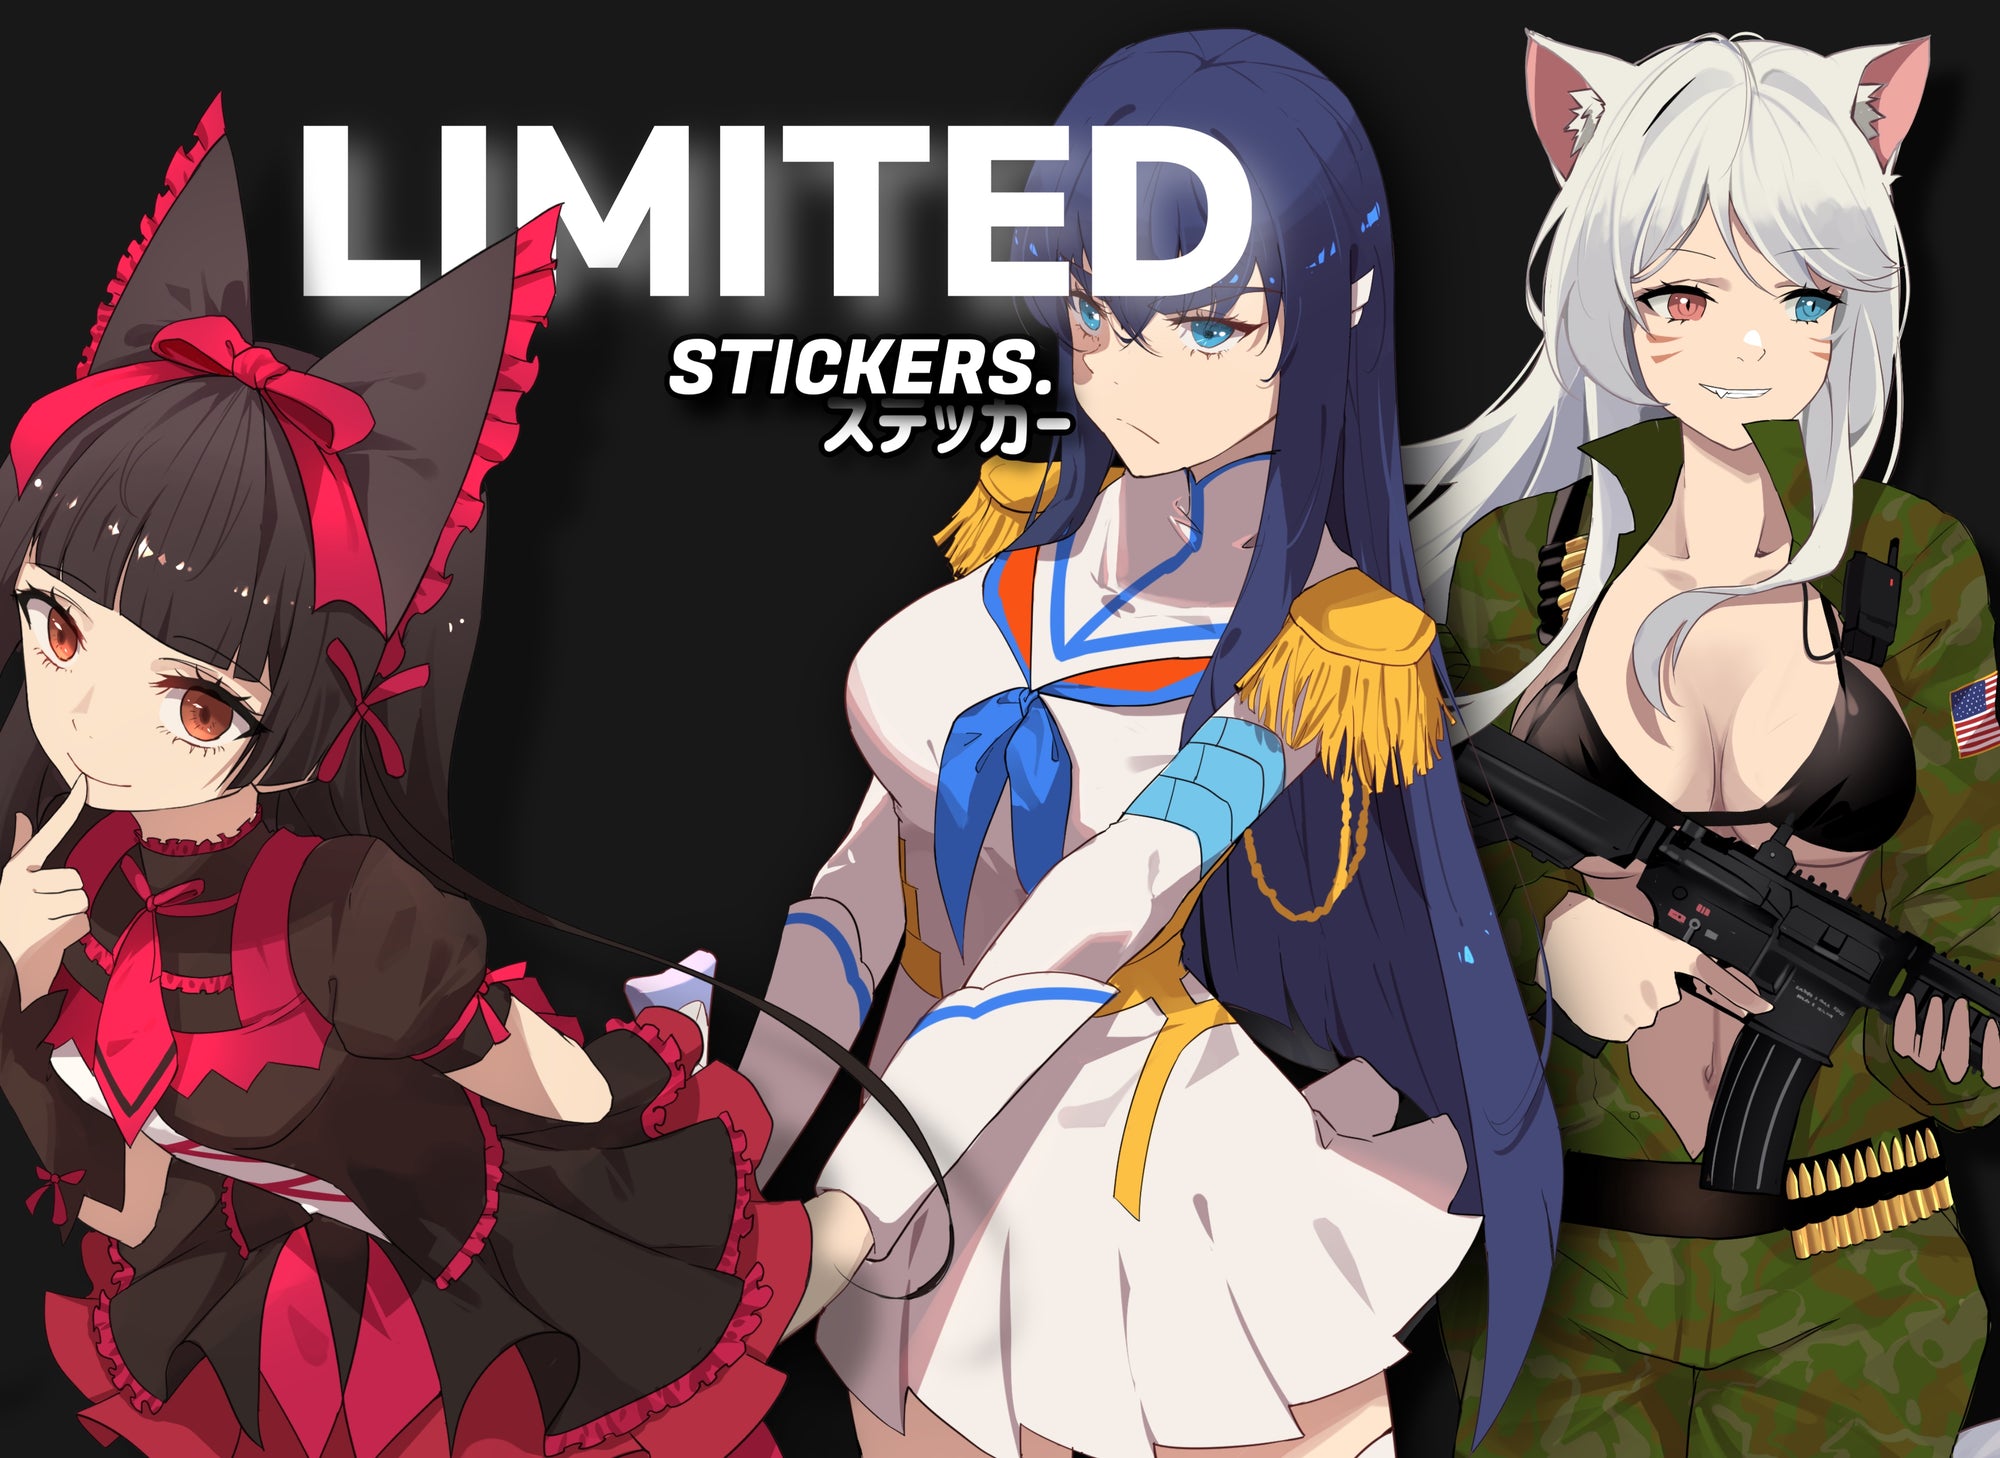 LIMITED STICKERS